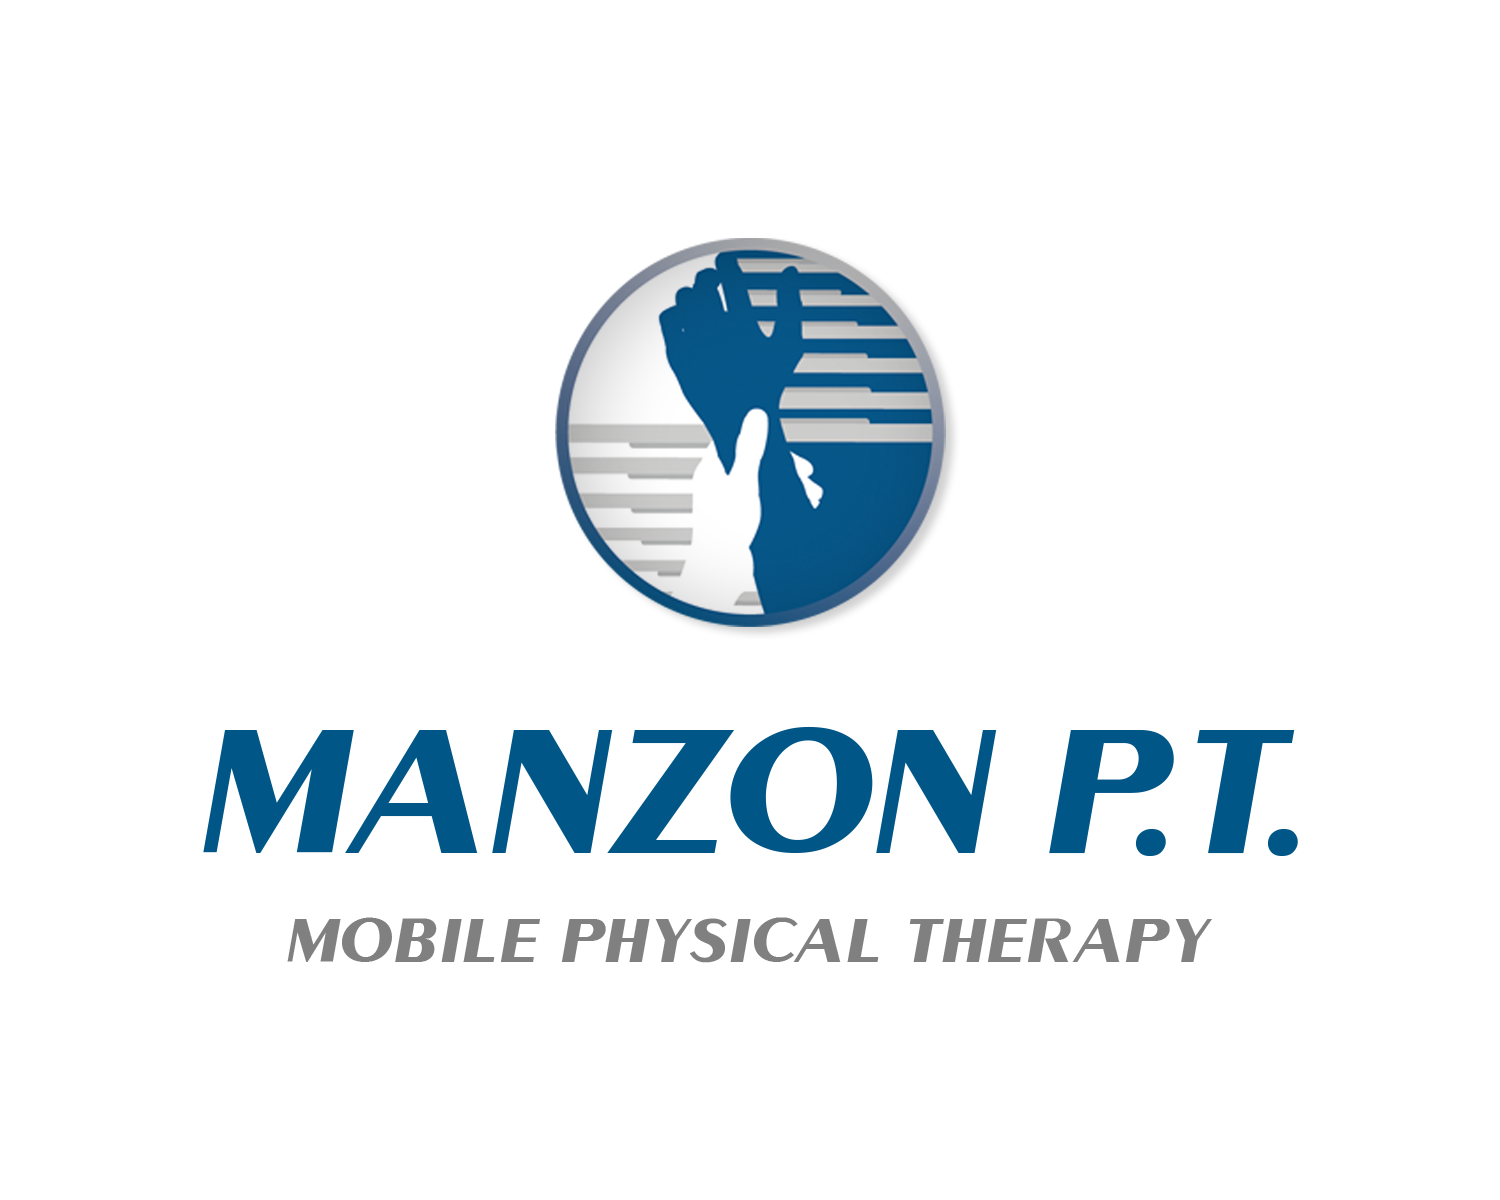 Gabriel Manzon M.PT. Mobile Physical Therapy